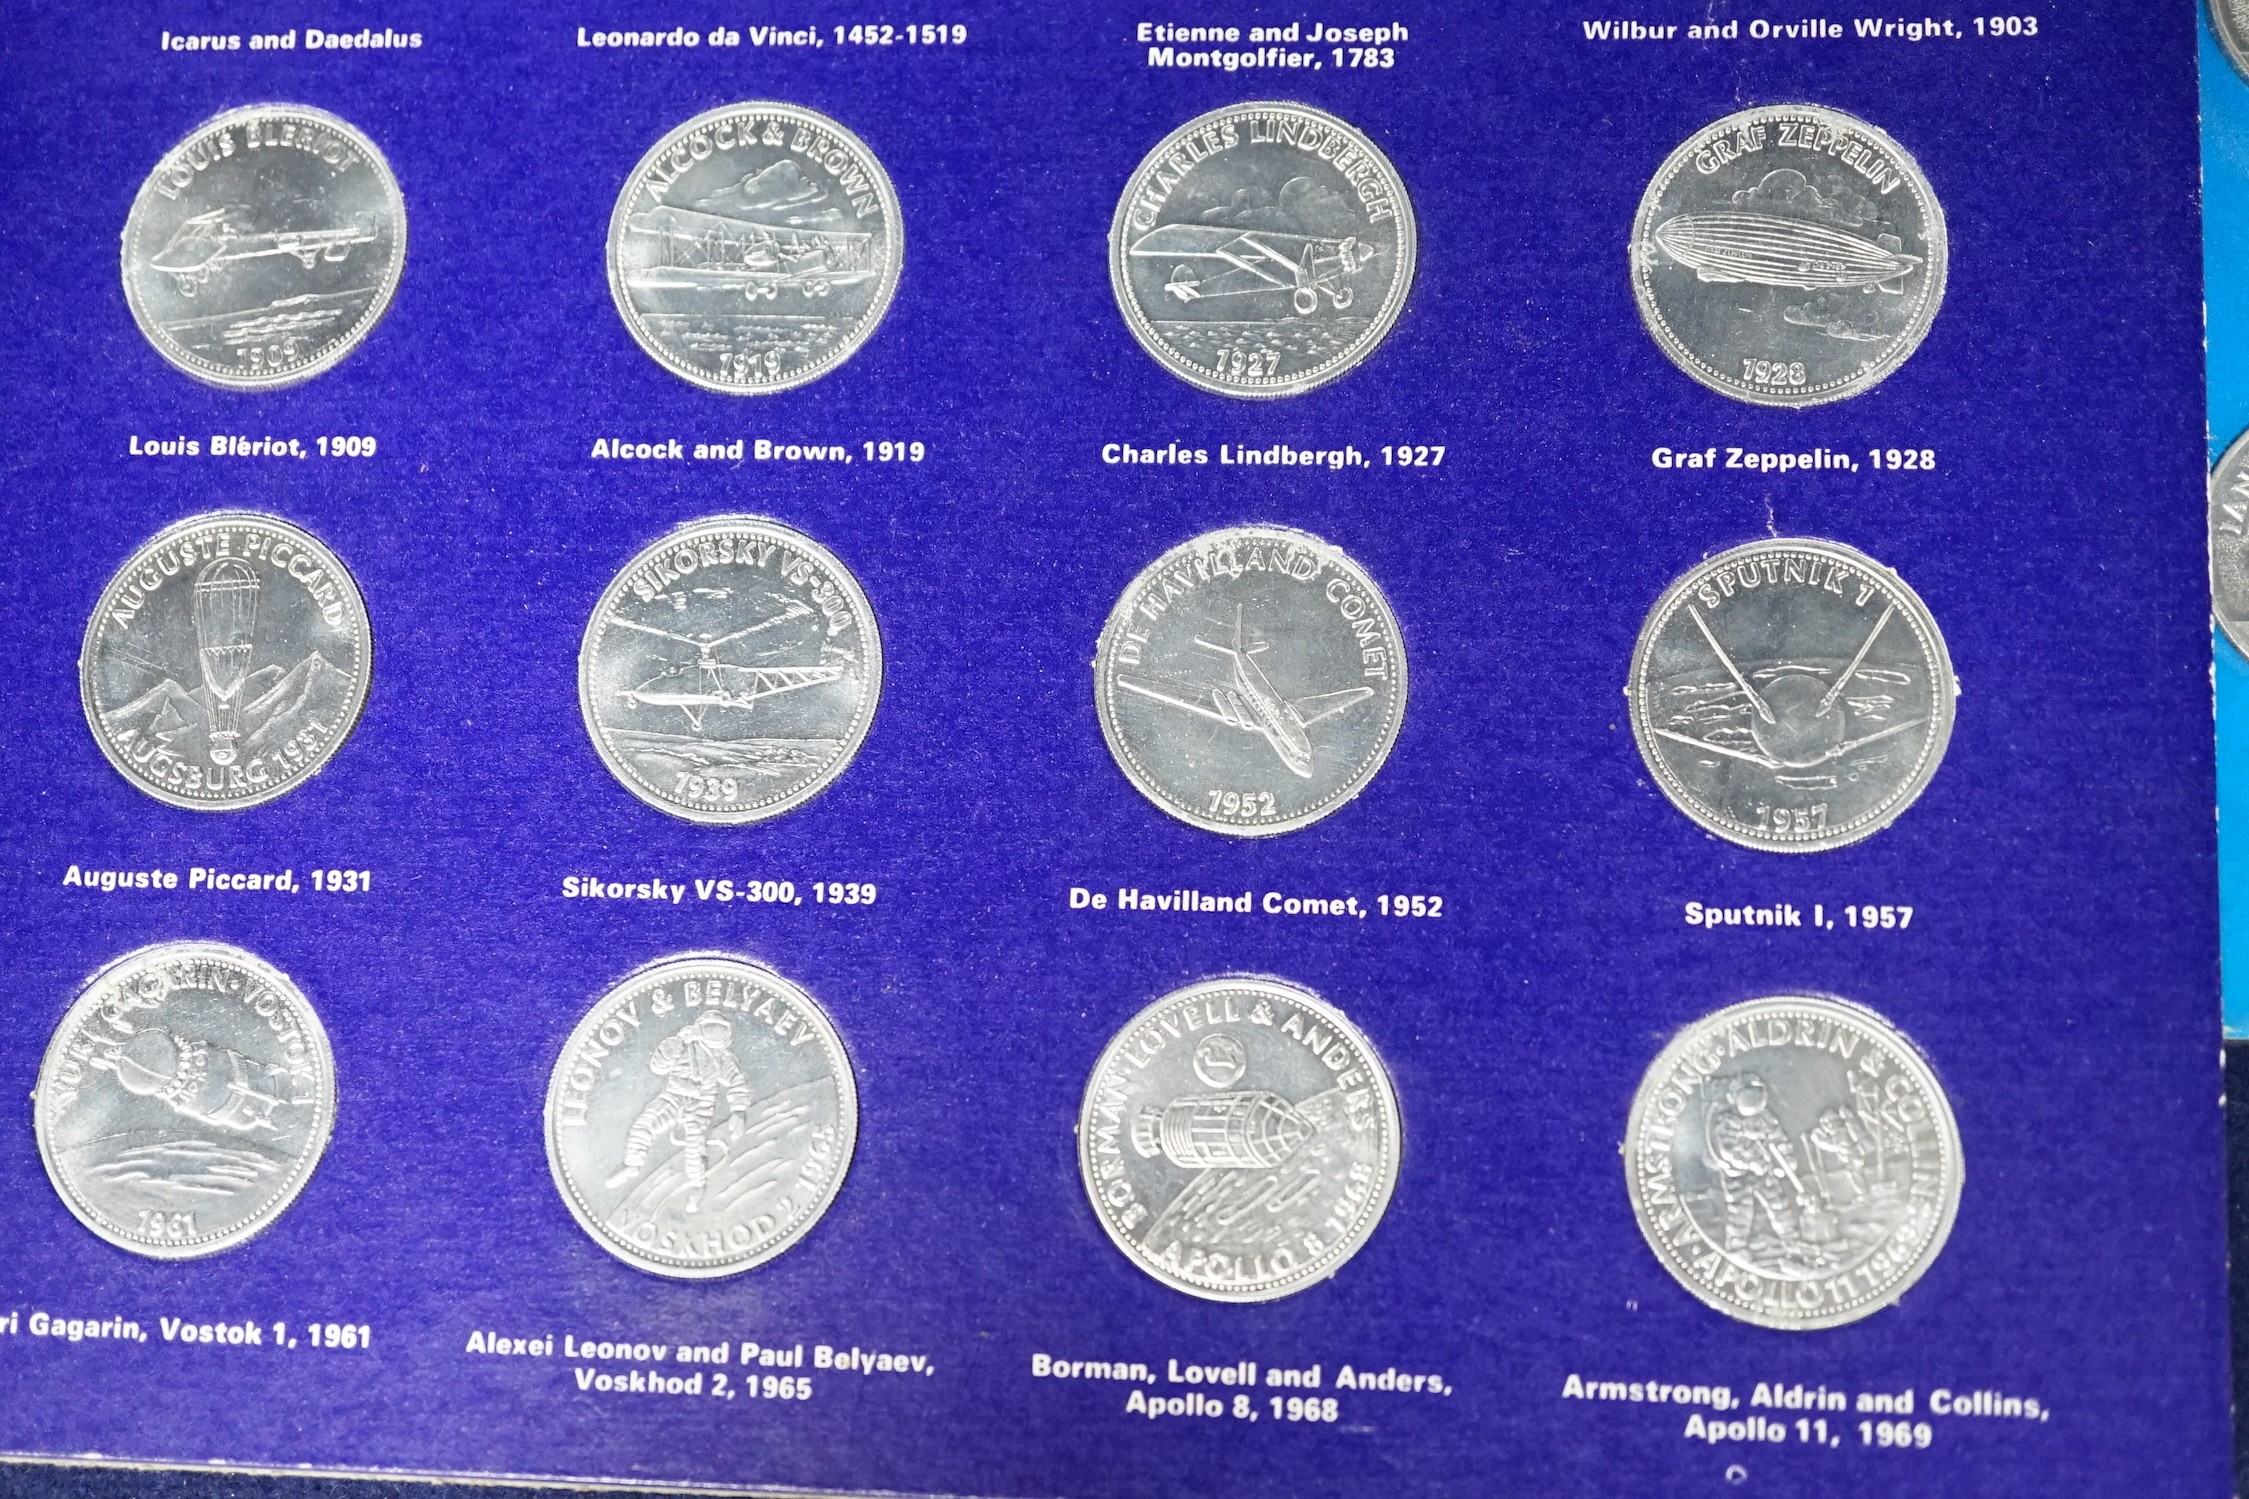 Shell and Esso collector's medals and coins for 1970 World cup, man in flight and FA cup centenary 1872-1972